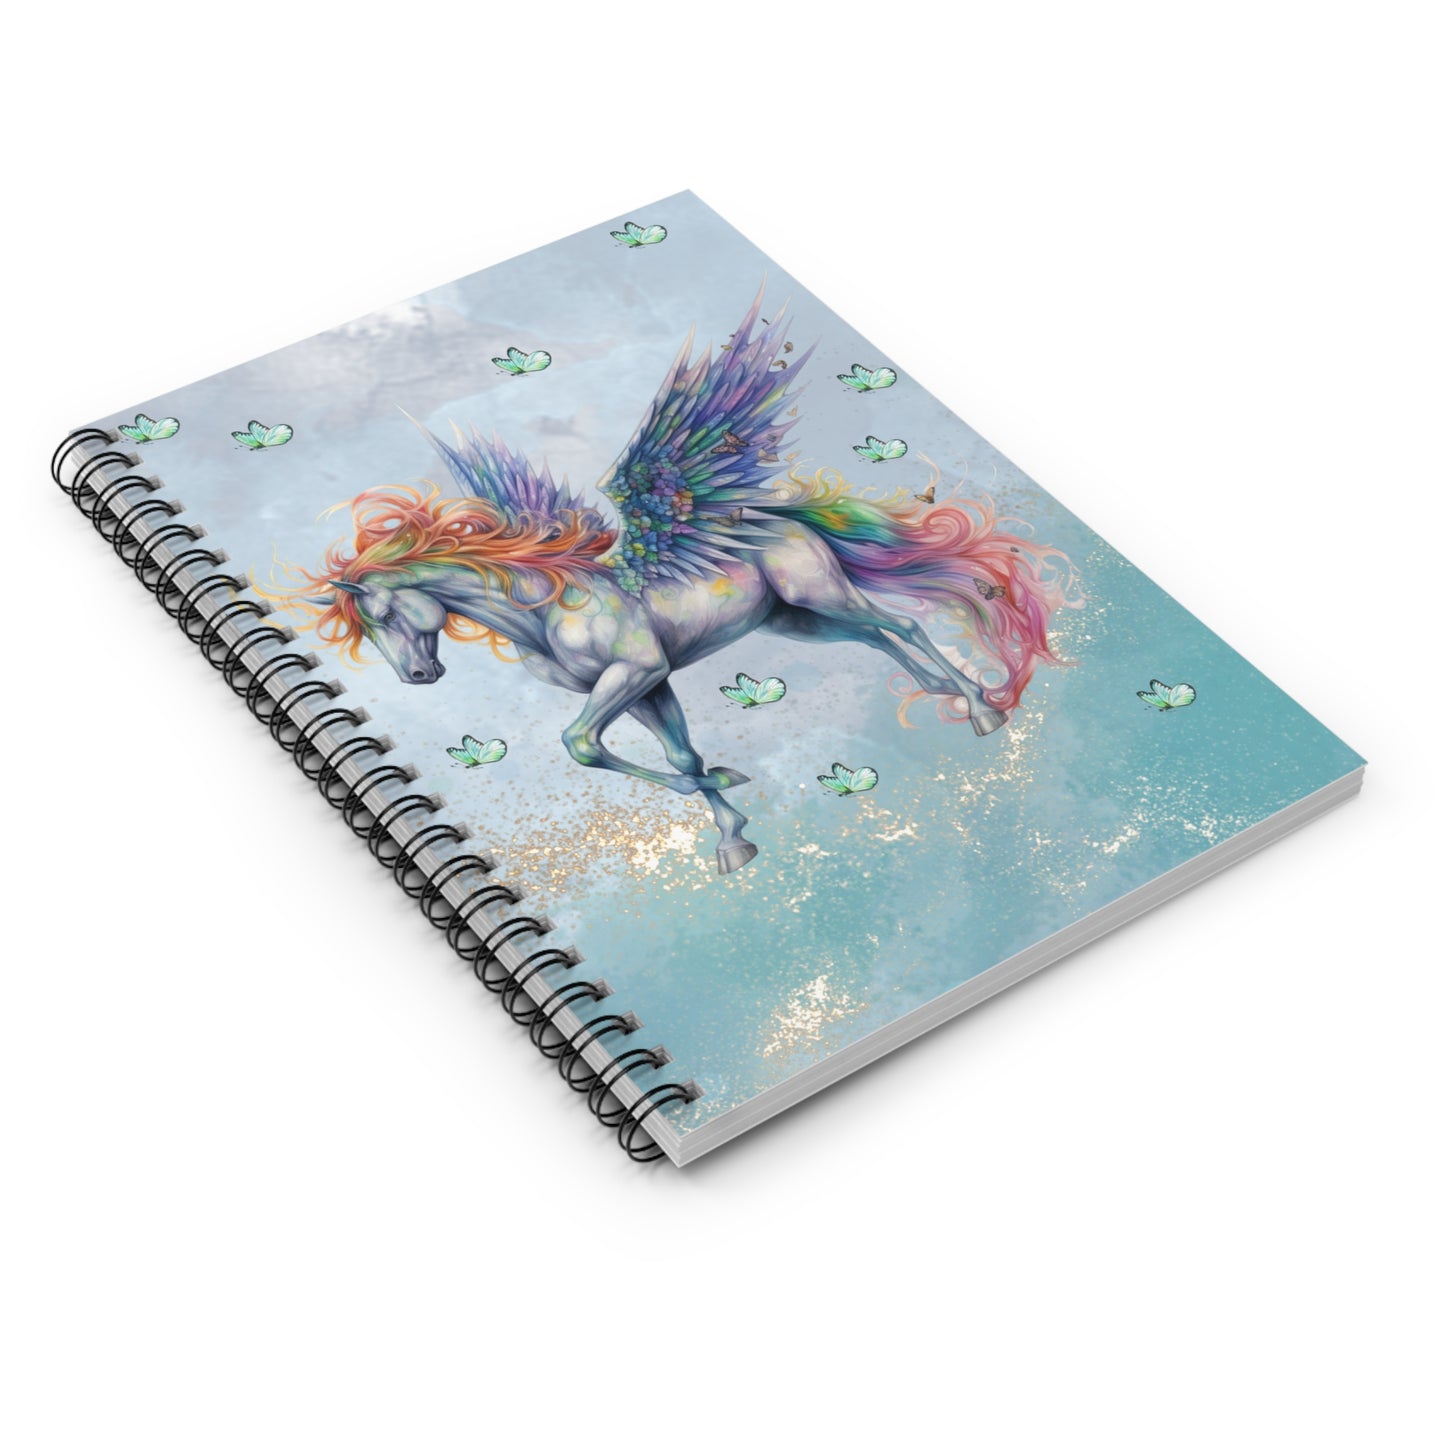 Unicorn Wings: Spiral Notebook - Log Books - Journals - Diaries - and More Custom Printed by TheGlassyLass.com